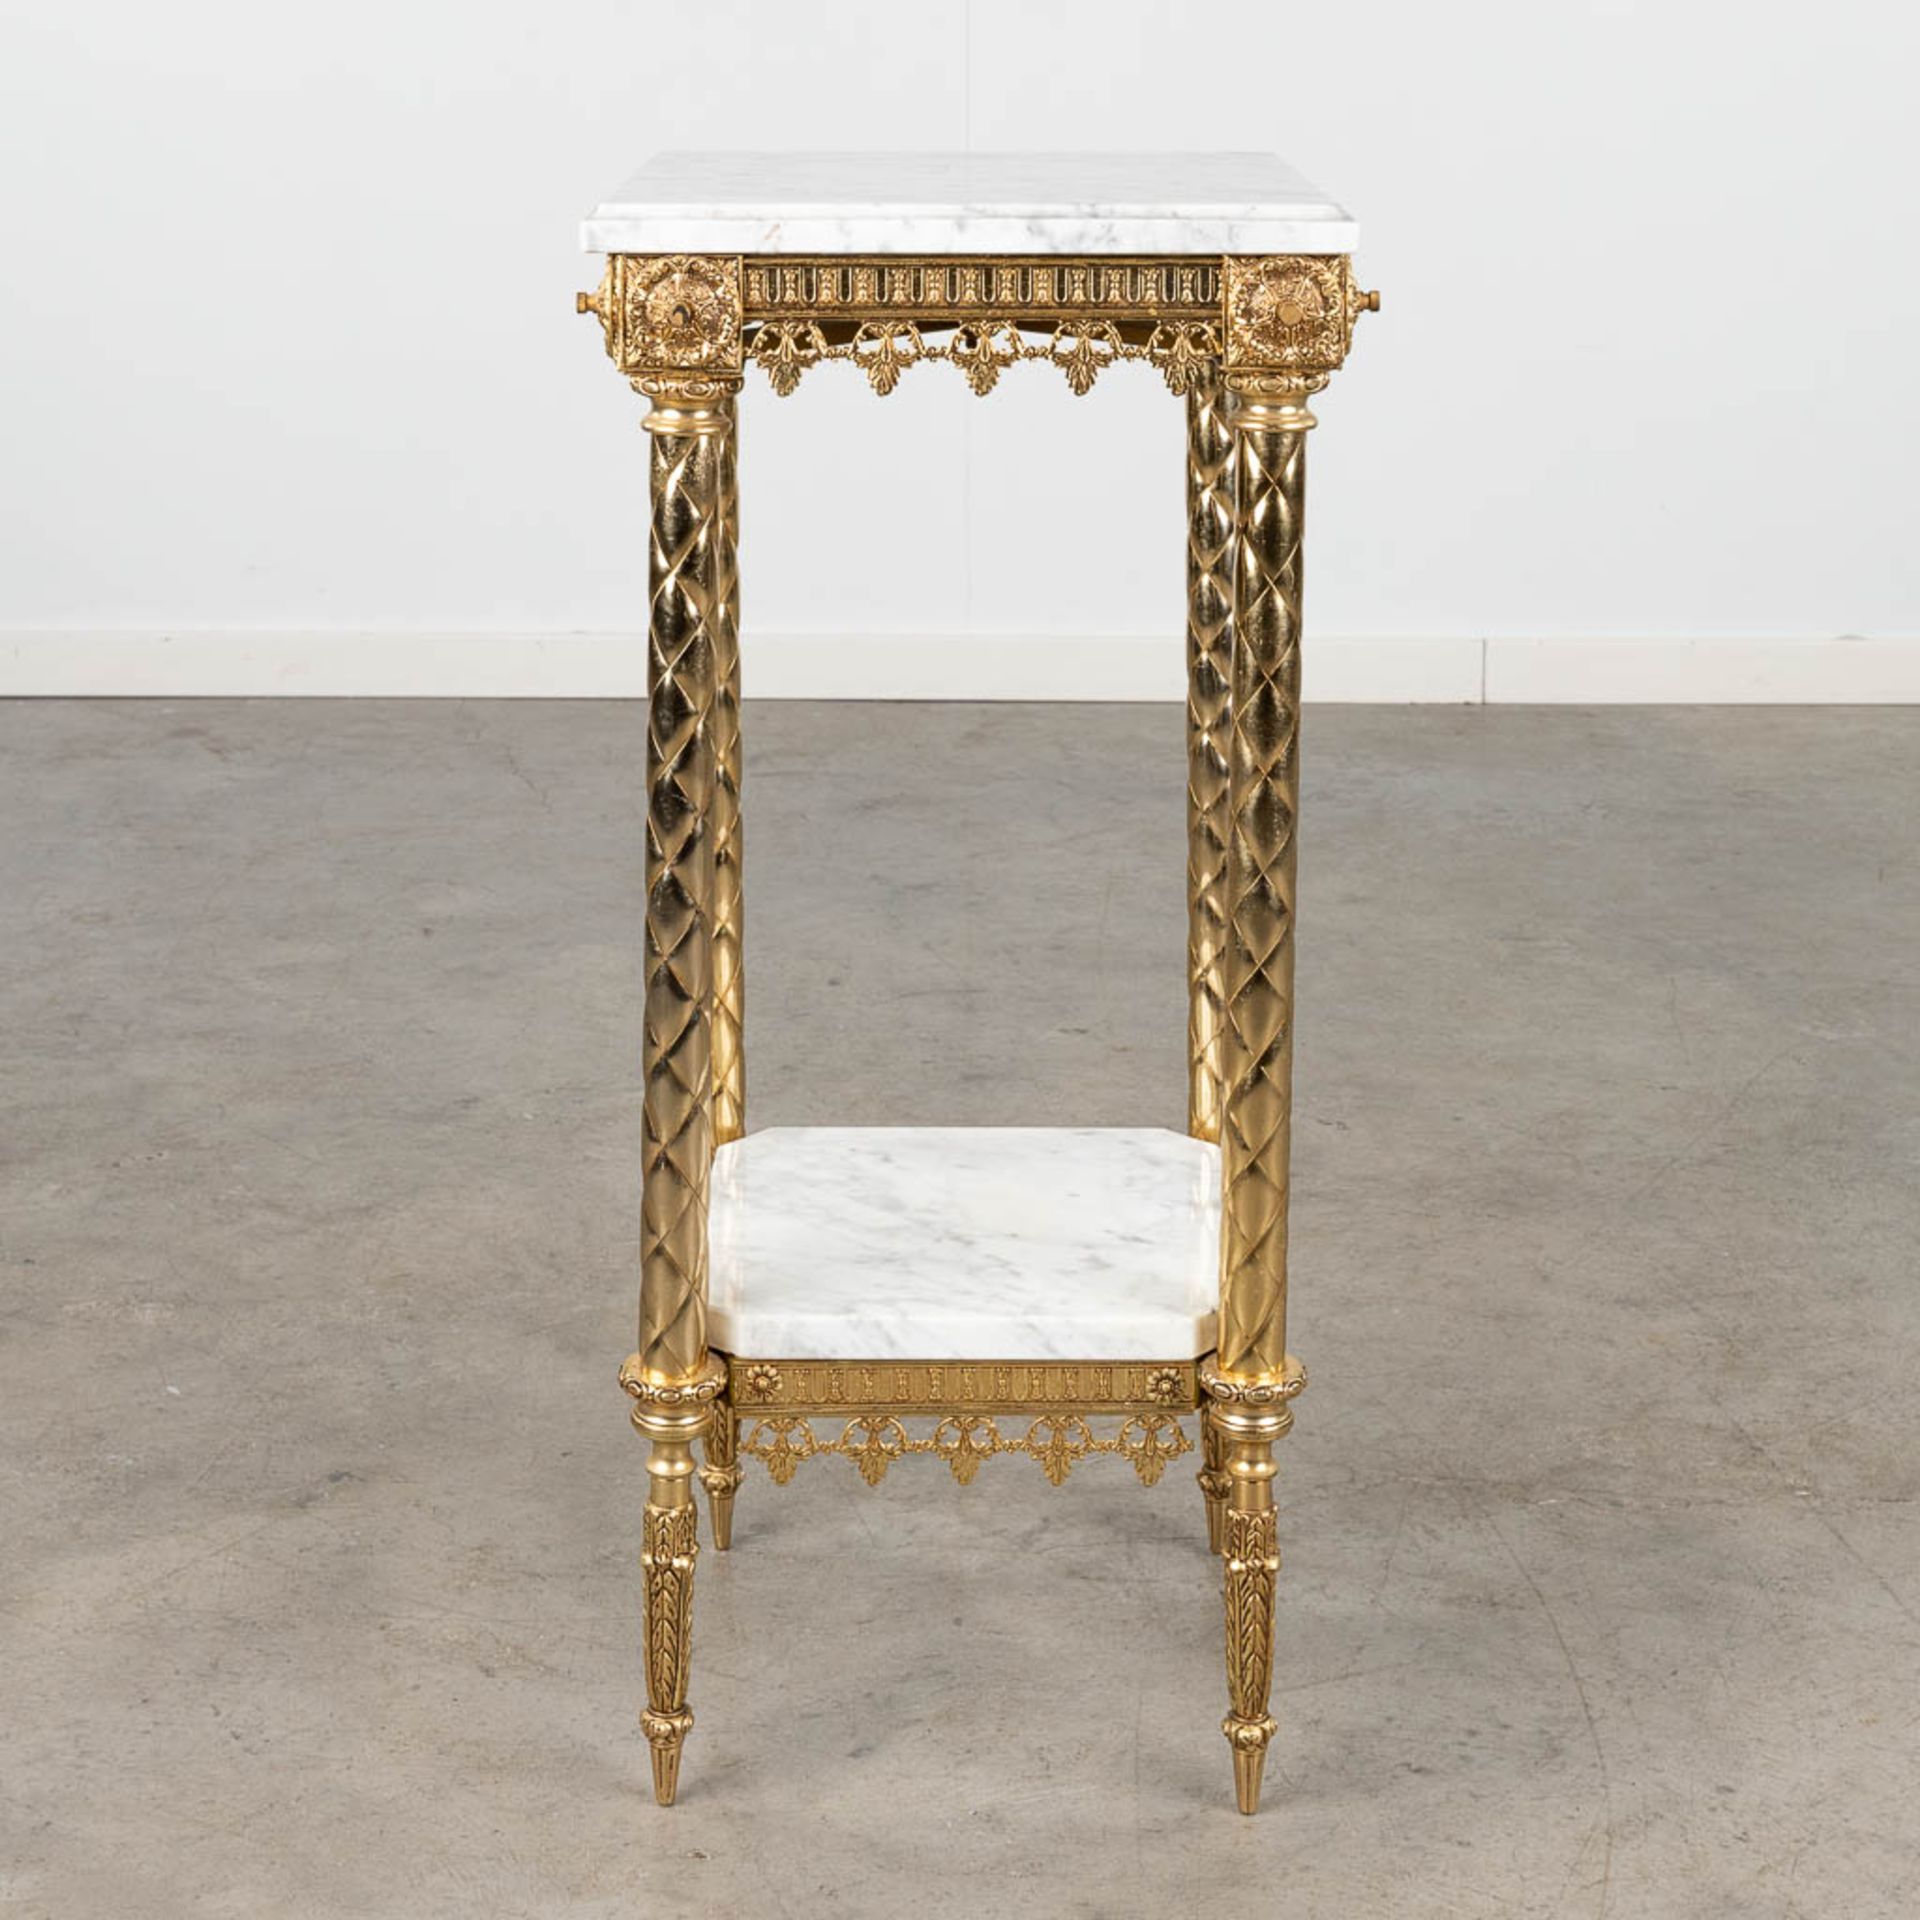 A pedestal, brass and white marble. 20th C. (L: 34 x W: 34 x H: 72 cm) - Image 3 of 11